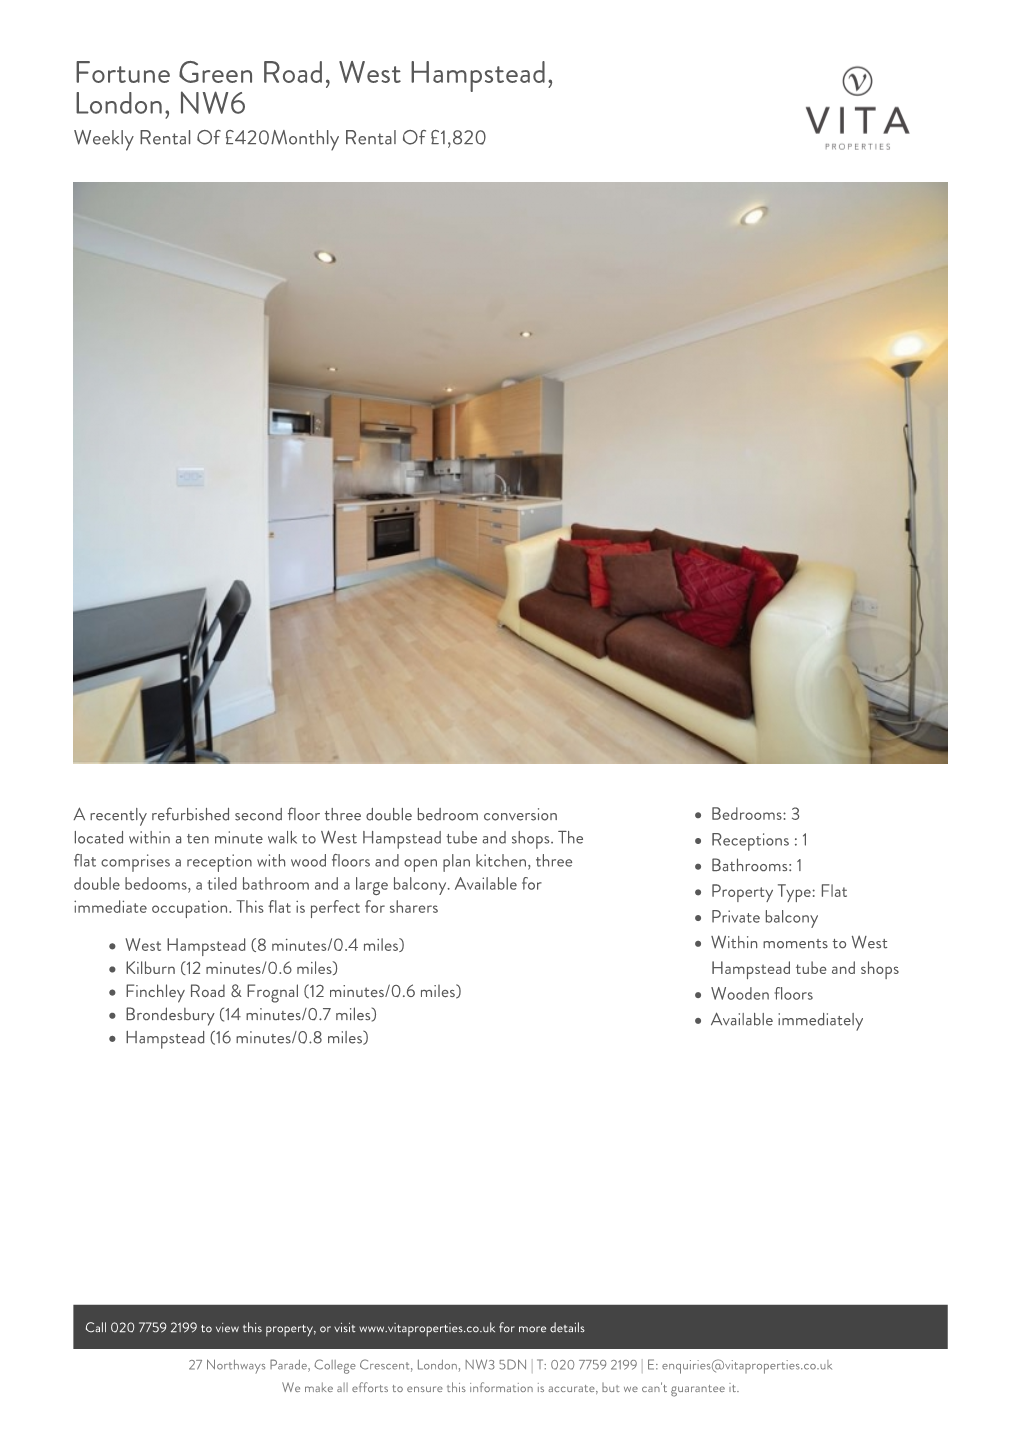 Fortune Green Road, West Hampstead, London, NW6 Weekly Rental of £420Monthly Rental of £1,820